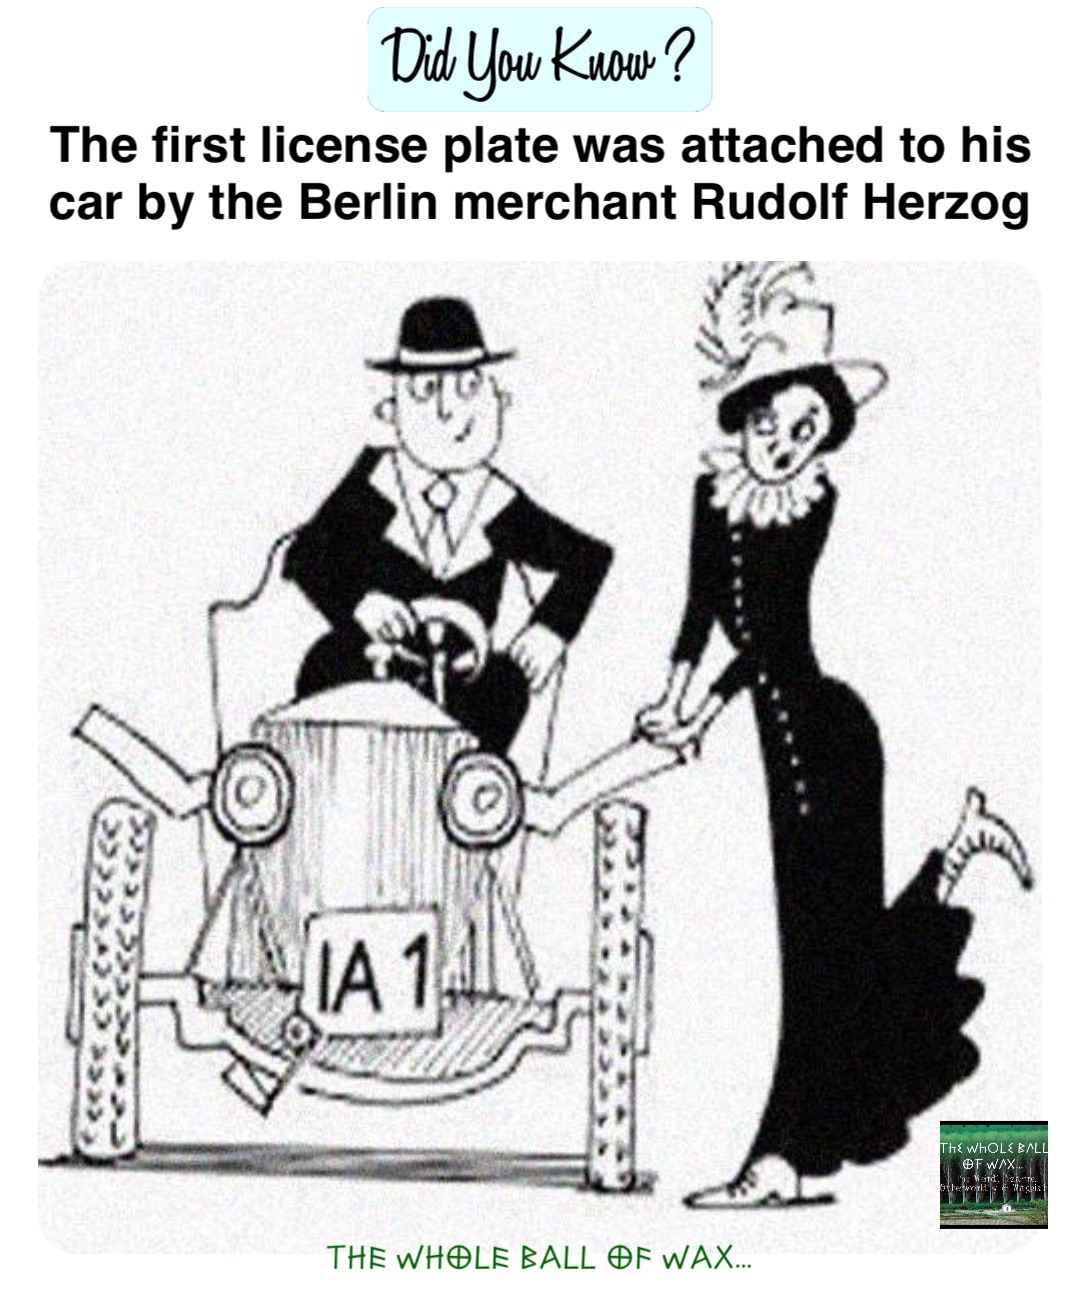 The first license plate was attached to his car by the Berlin merchant Rudolf Herzog